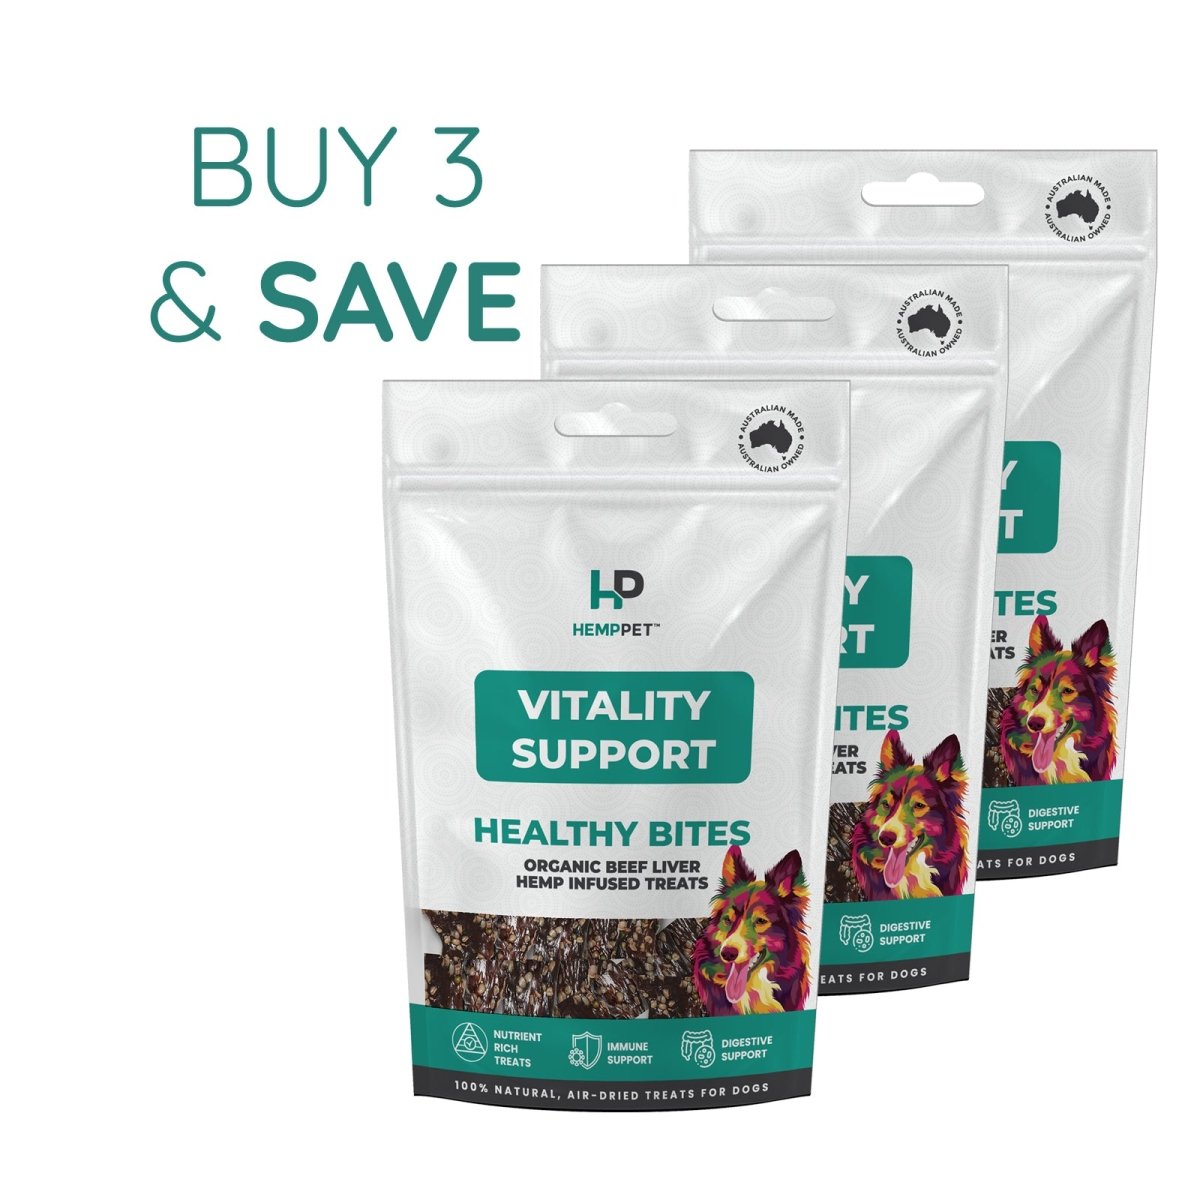 Vitality Support | Hemp Infused Organic Beef Liver Treats for Dogs 80g | Buy 3 and Save - HempPet.com.au